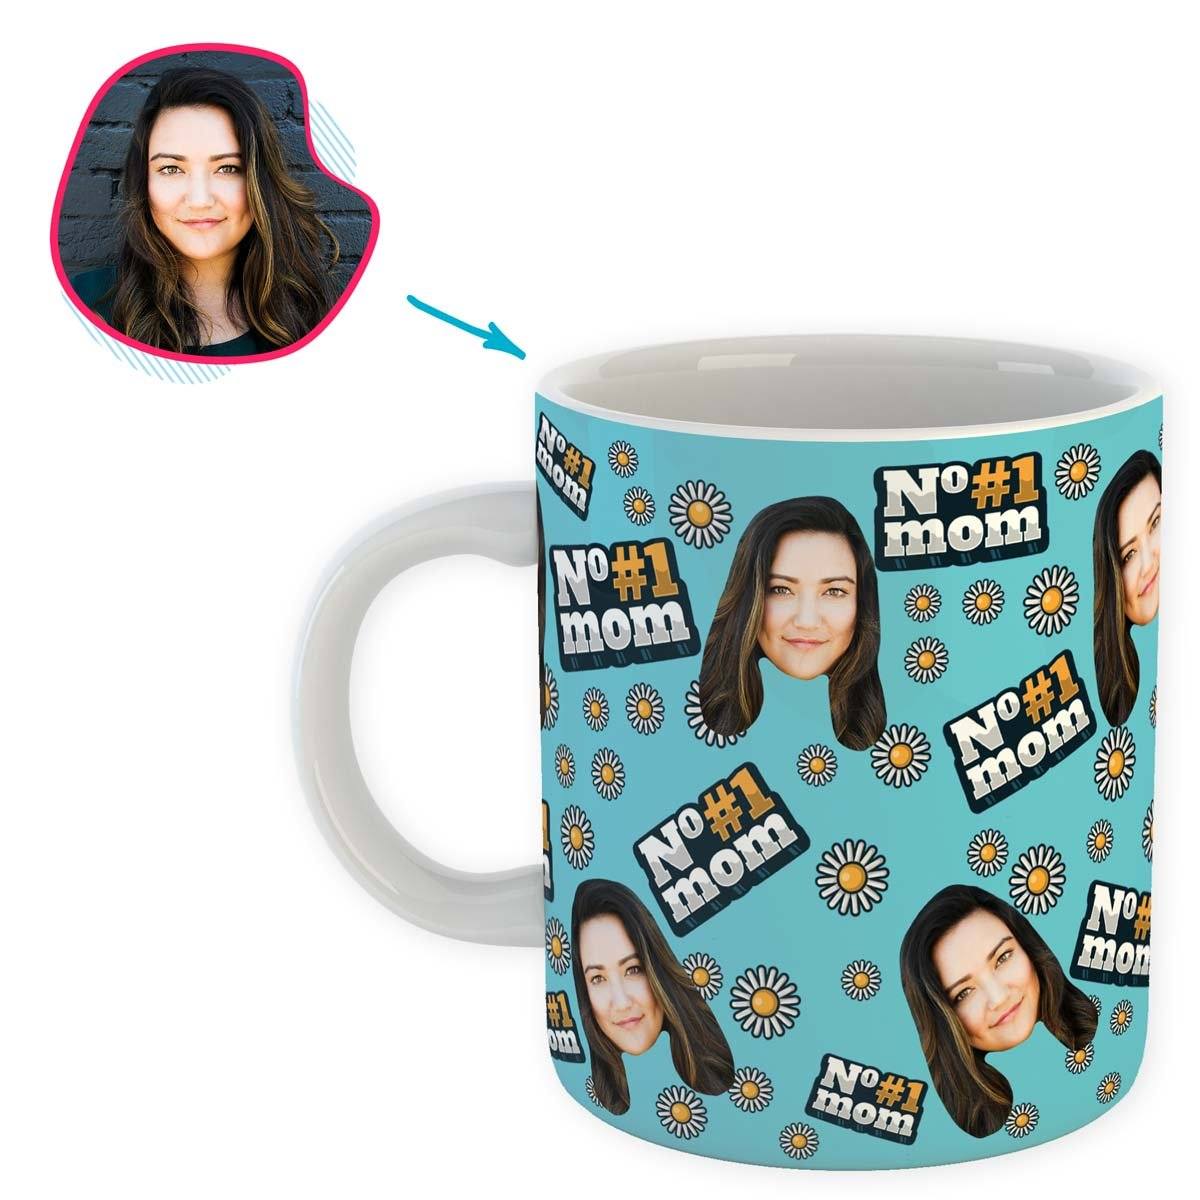 blue #1 Mom mug personalized with photo of face printed on it